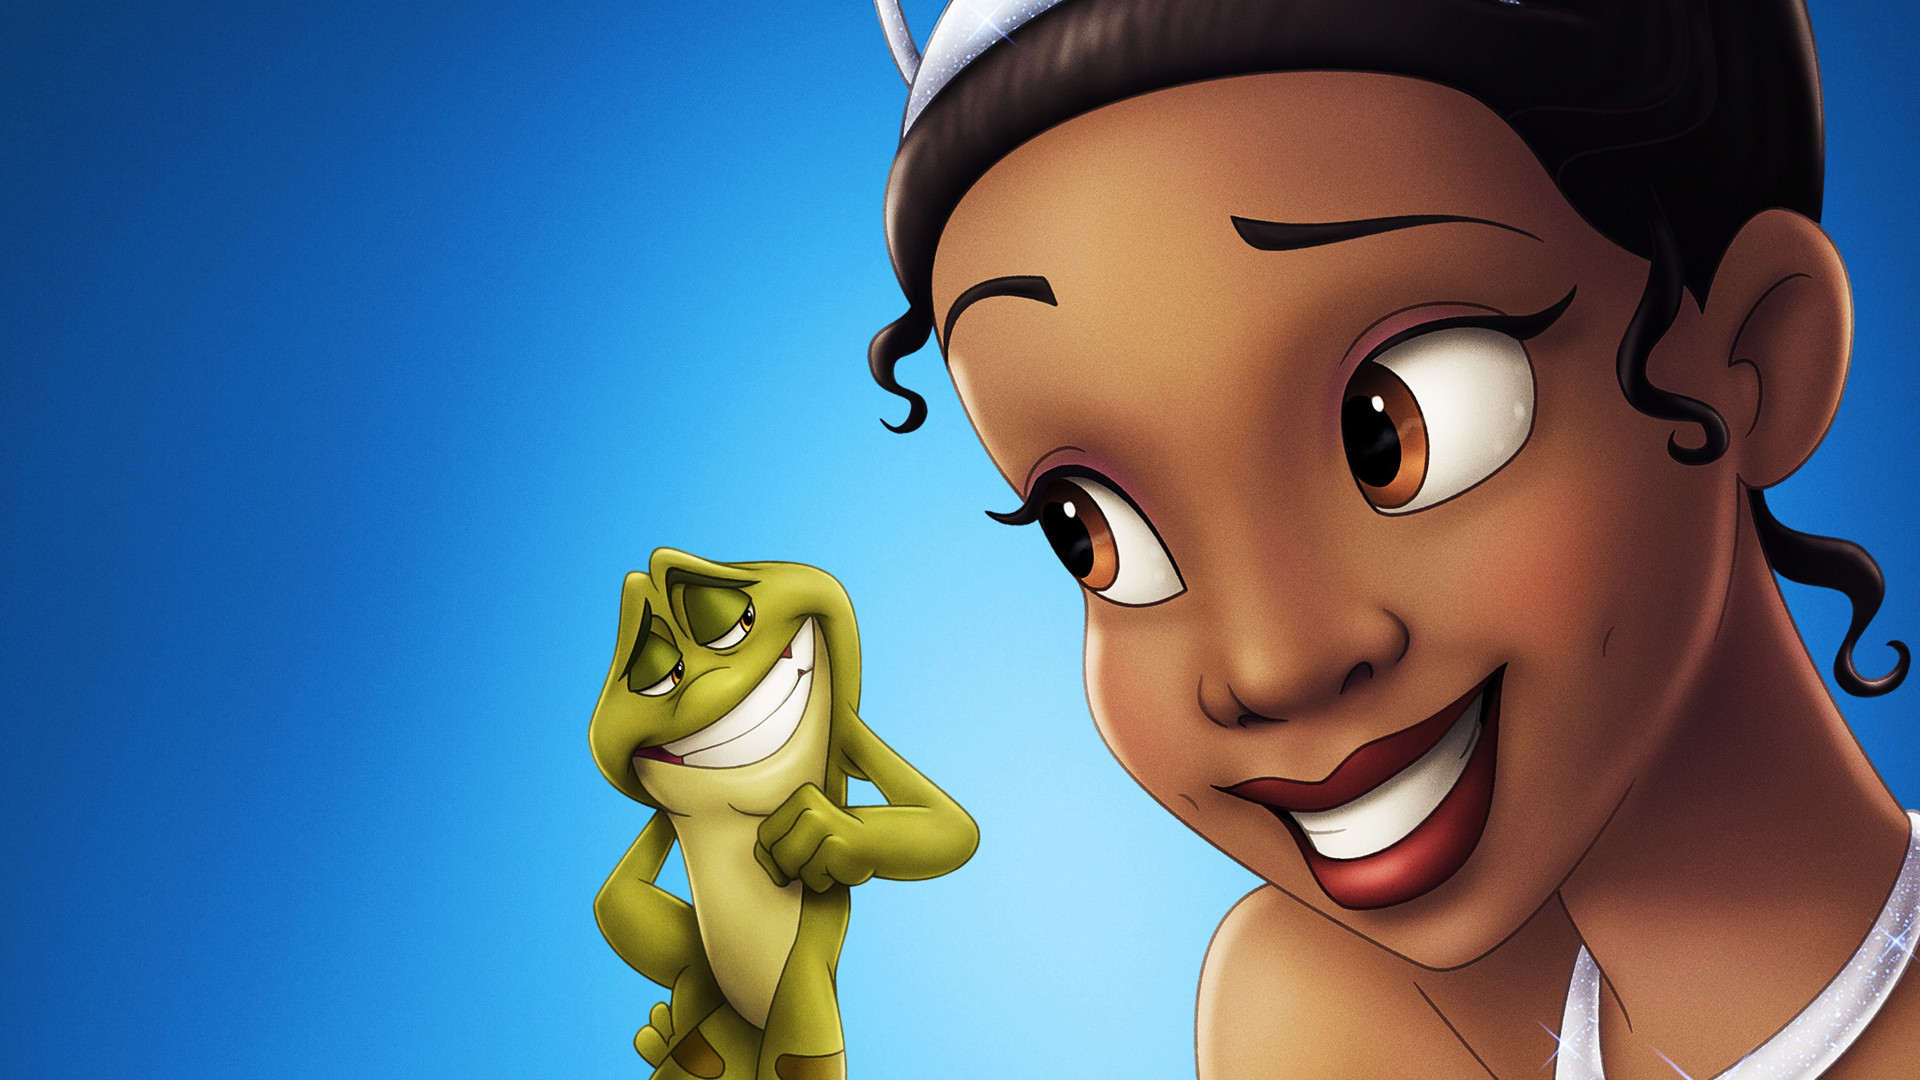 1920x1080 Stunning Princess And The Frog Picture